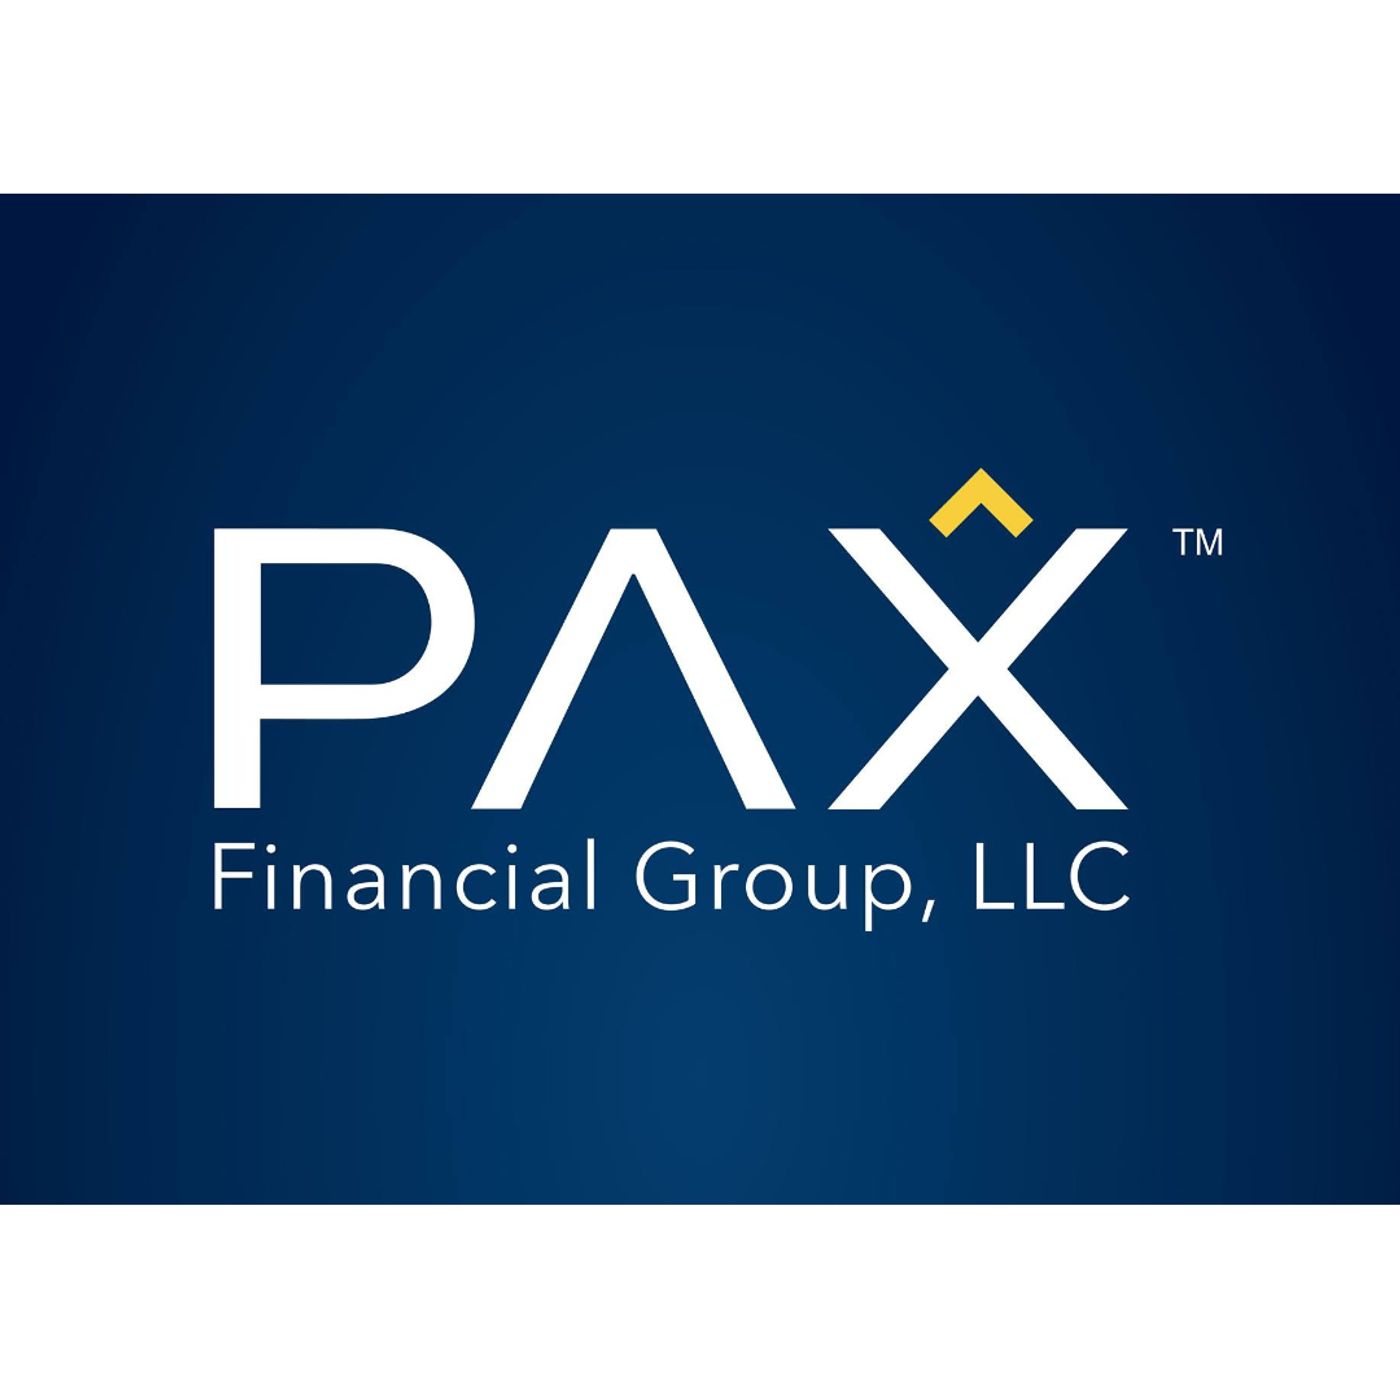 Darryl Lyons CEO and cofounder of PAX Financial Group, LLC